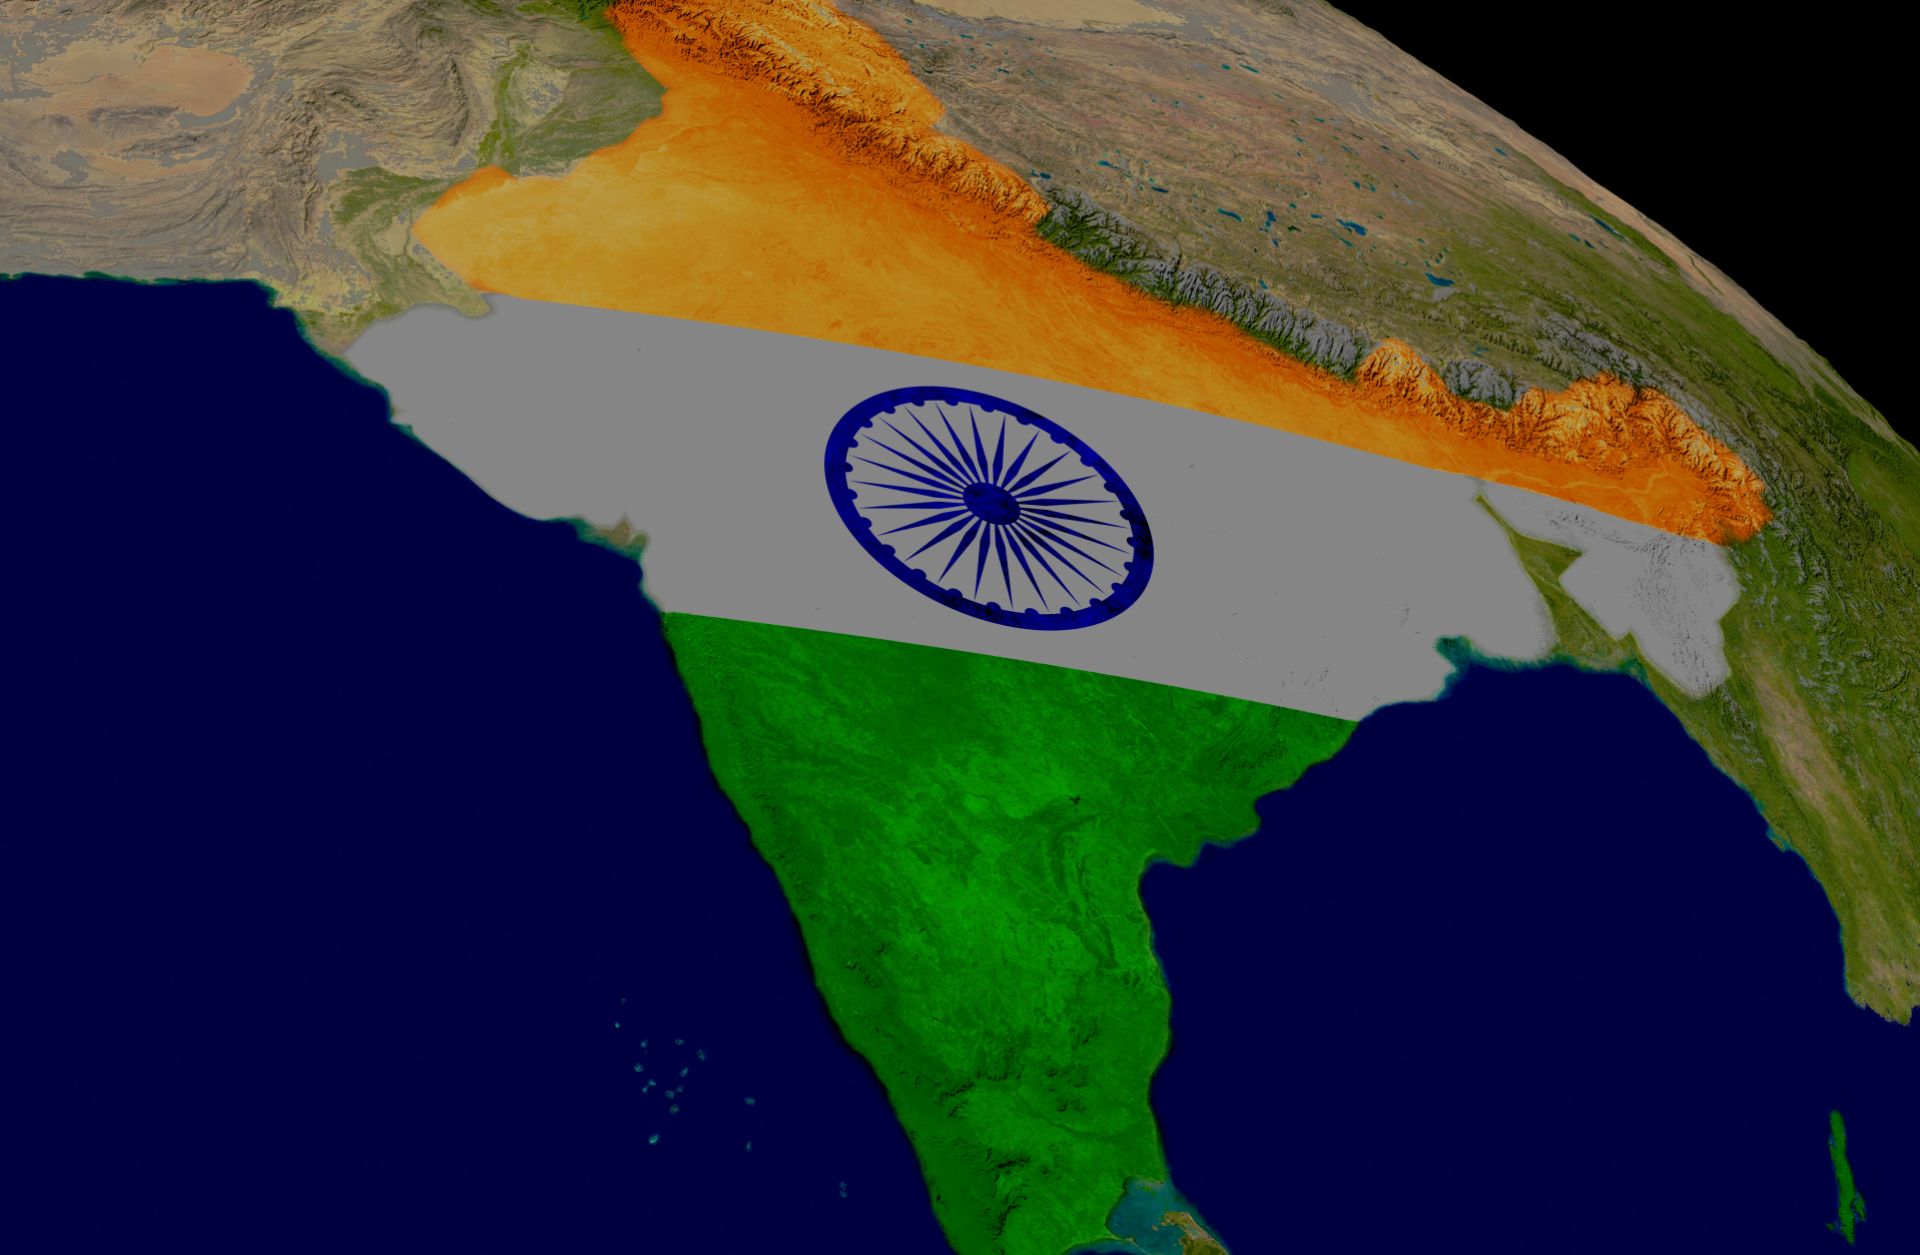 A map of India is seen superimposed over the country's territory.